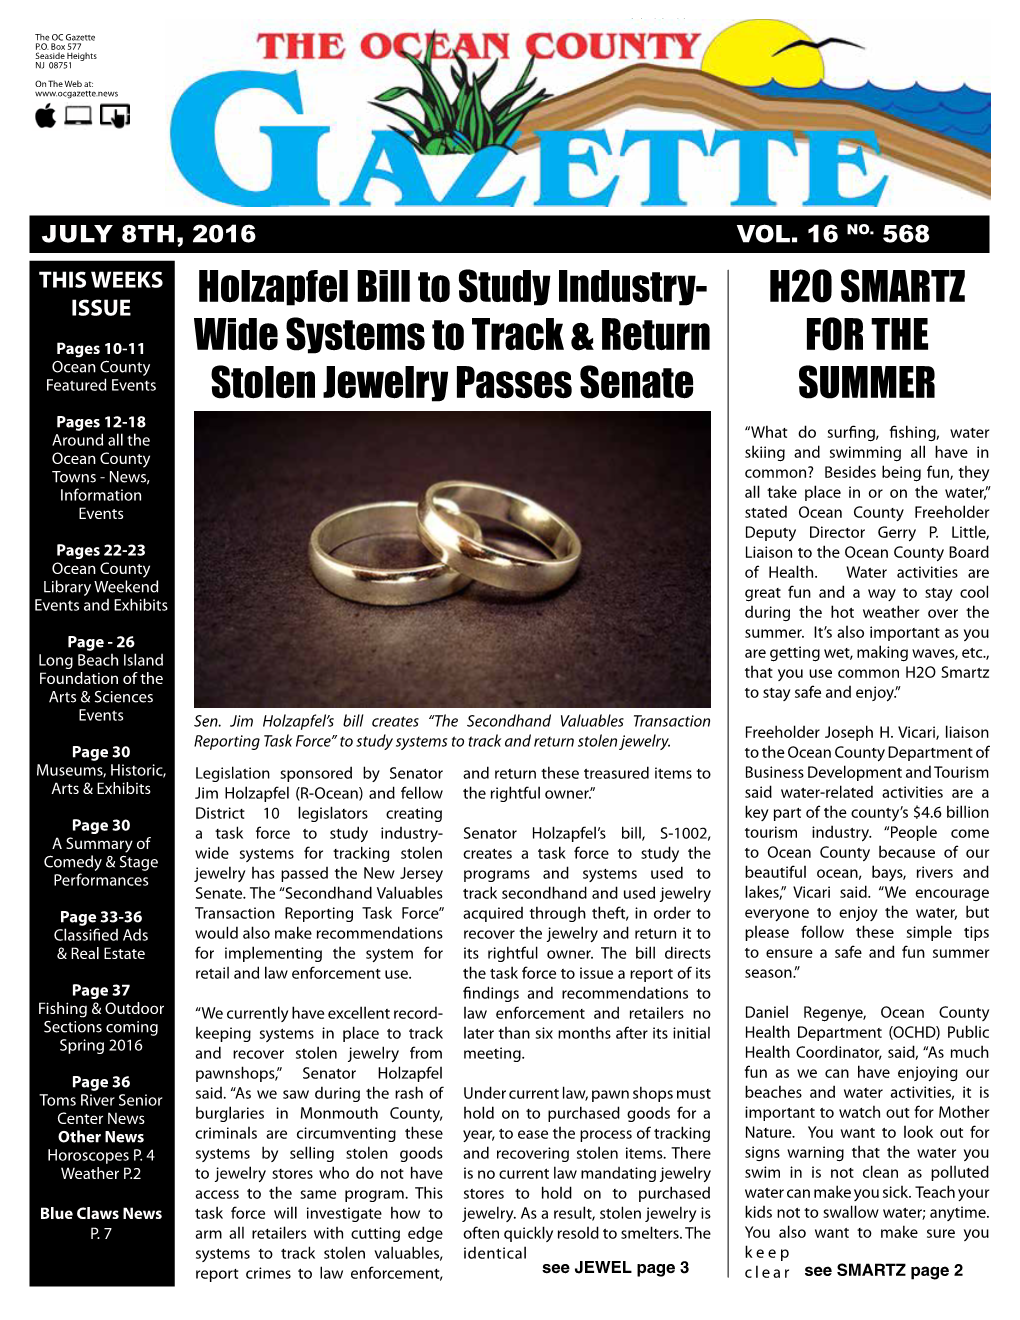 Wide Systems to Track & Return Stolen Jewelry Passes Senate